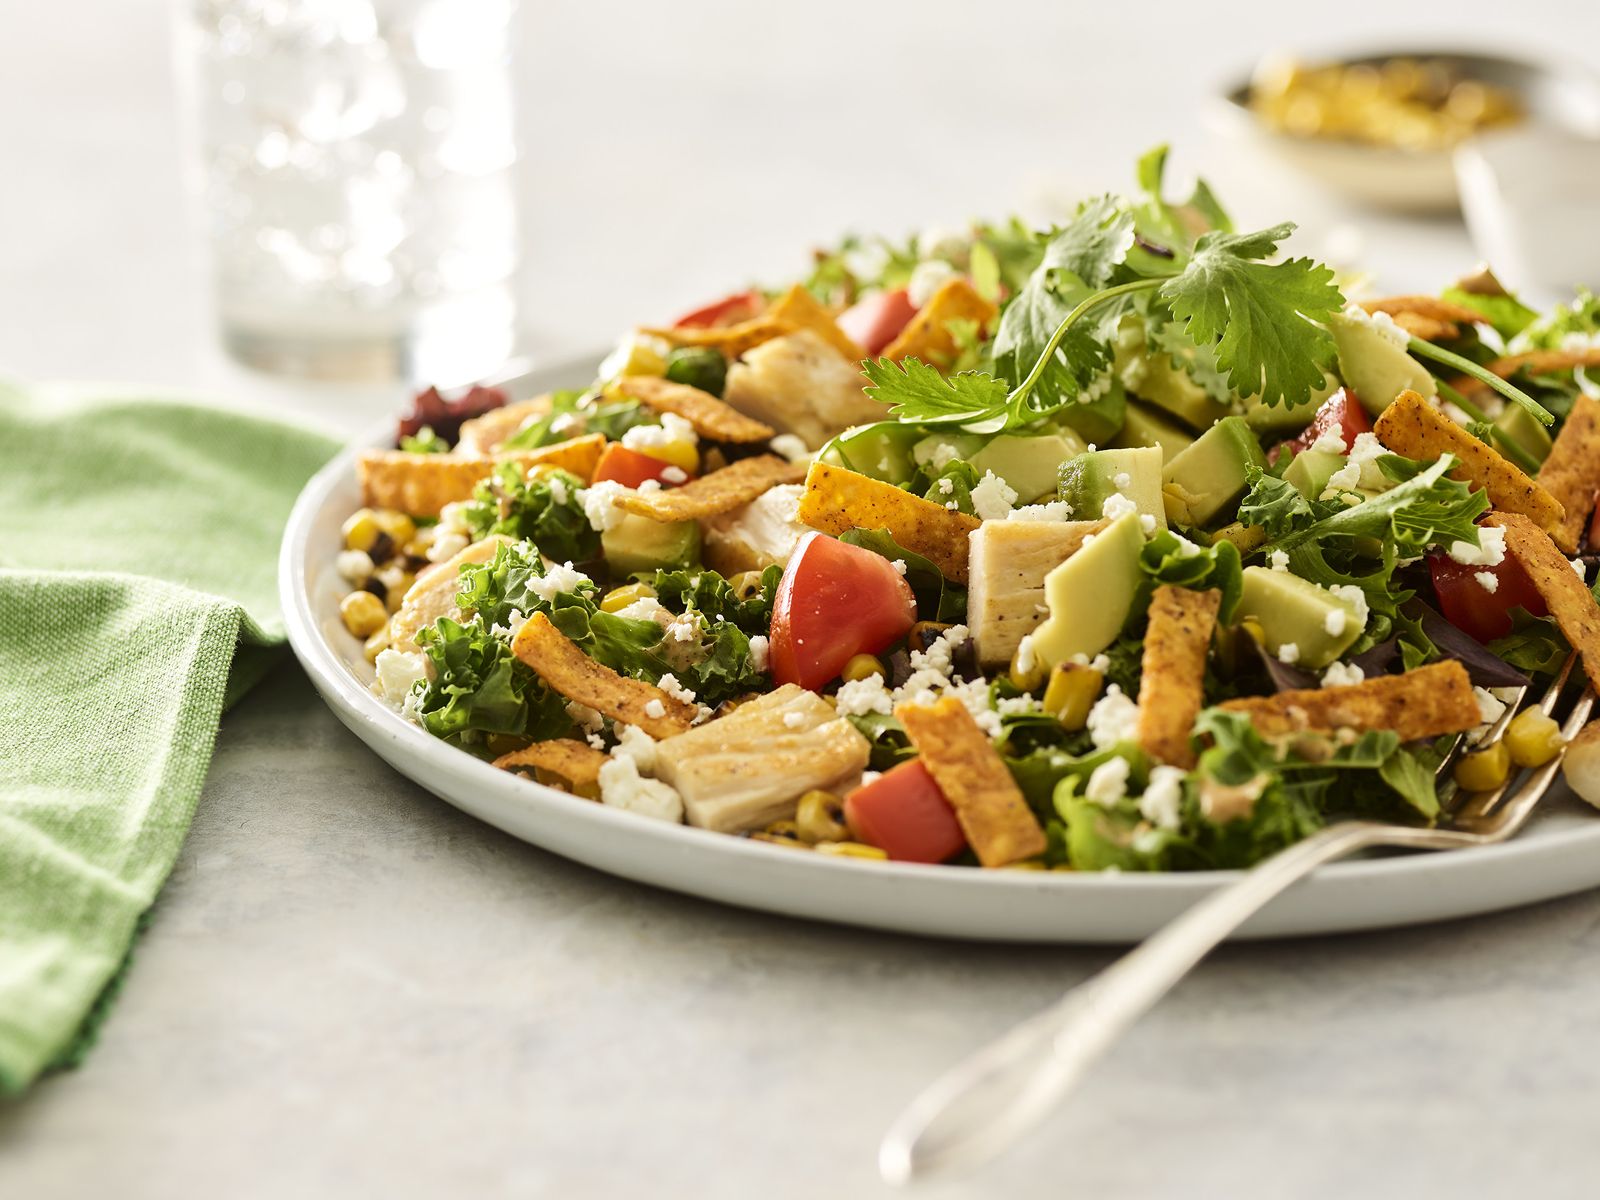 Noodles & Company is Bringing the Flavor This Summer with the Launch of Three New Salads